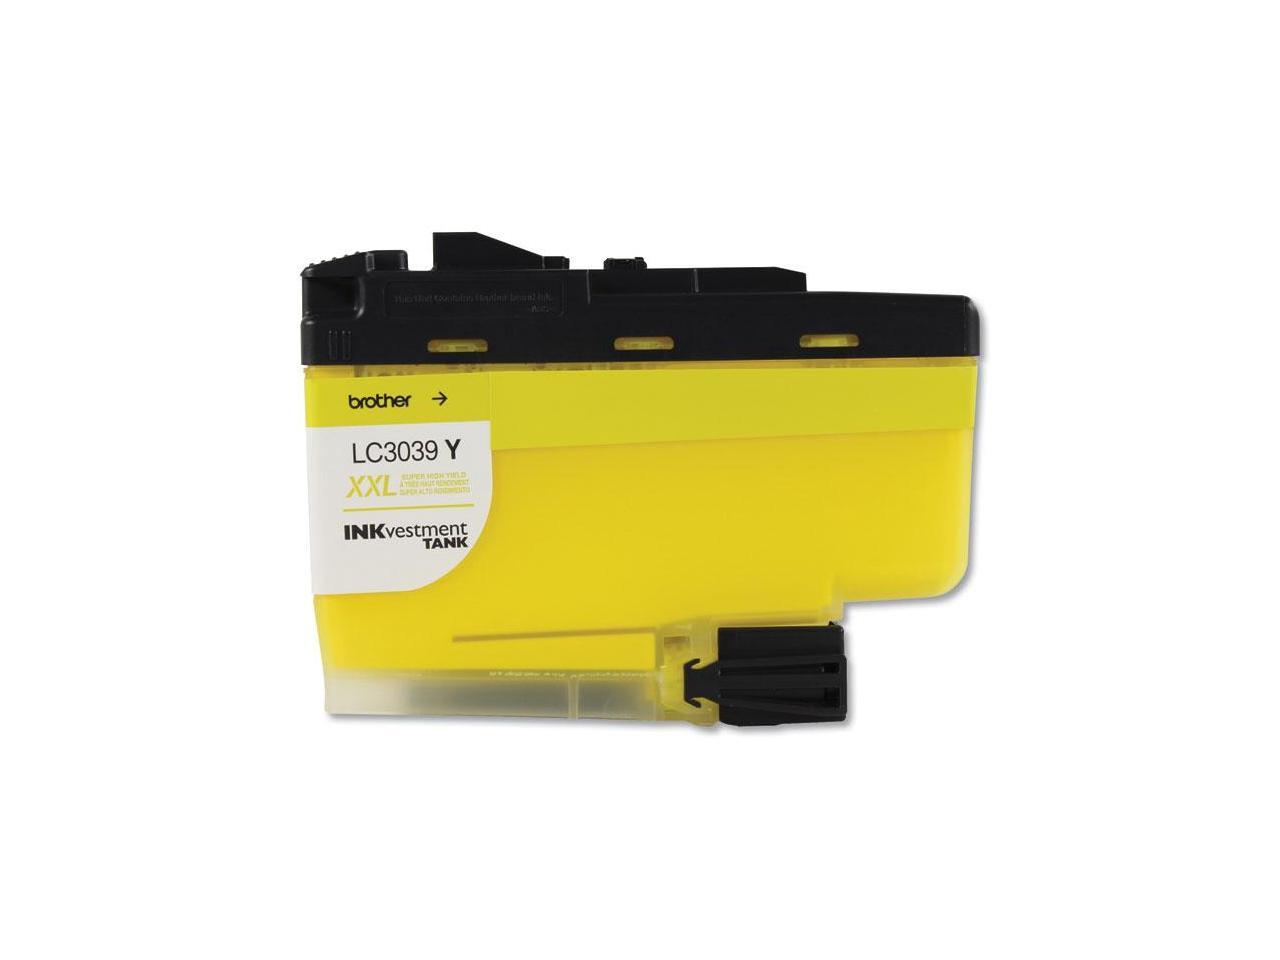 Brother LC3039Y Ultra High Yield INKvestment Ink Cartridge - Yellow